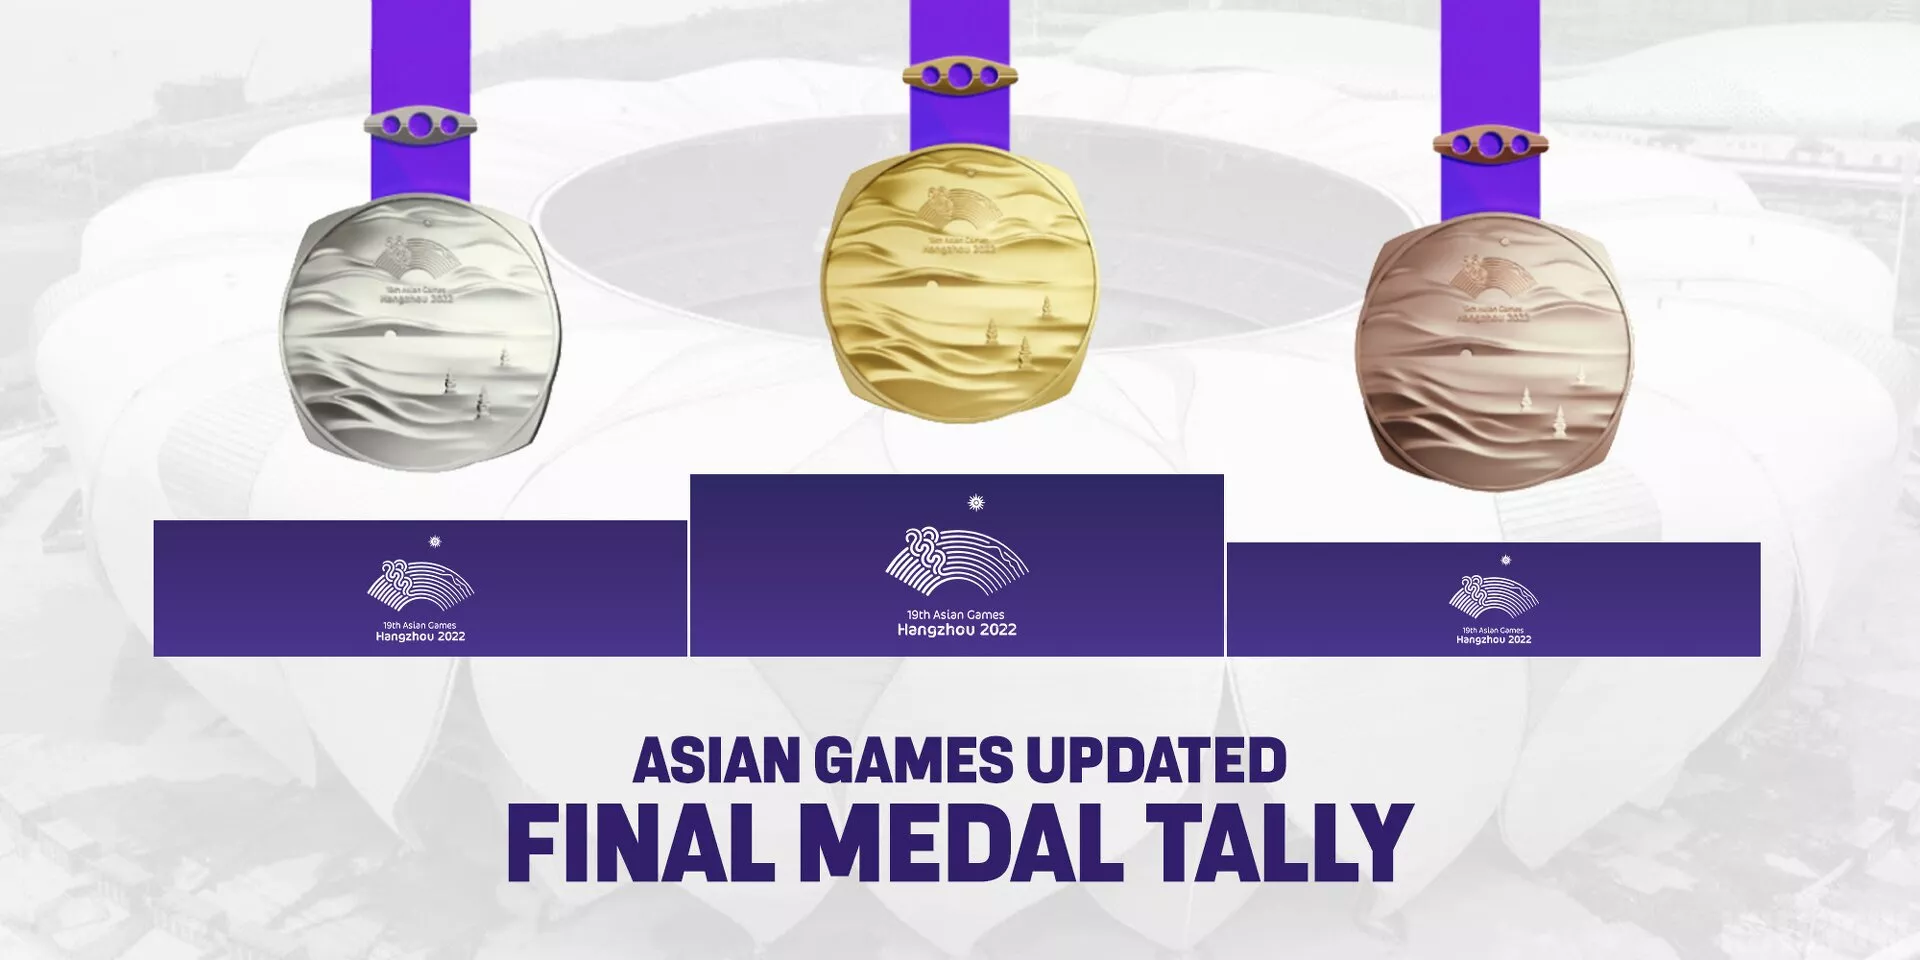 Asian Games 2023 Updated final medal tally